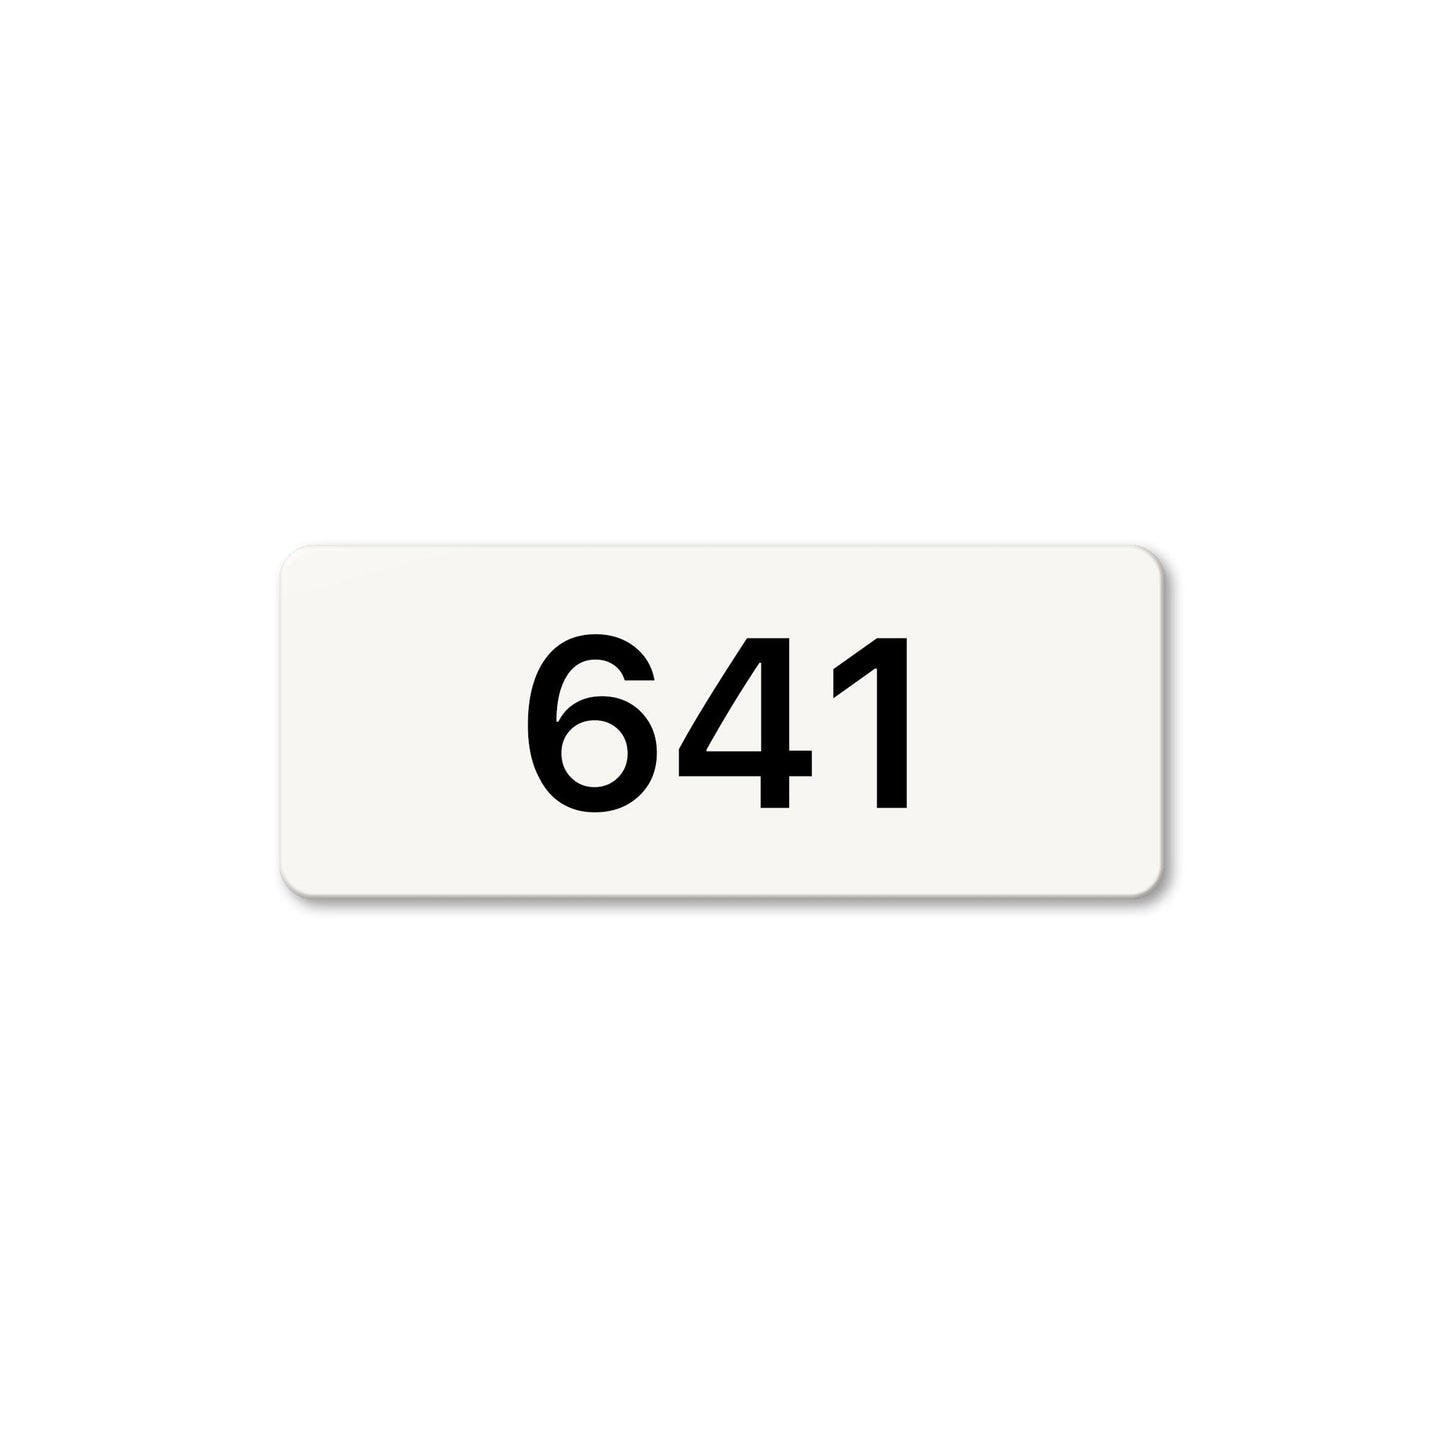 Numeral 641